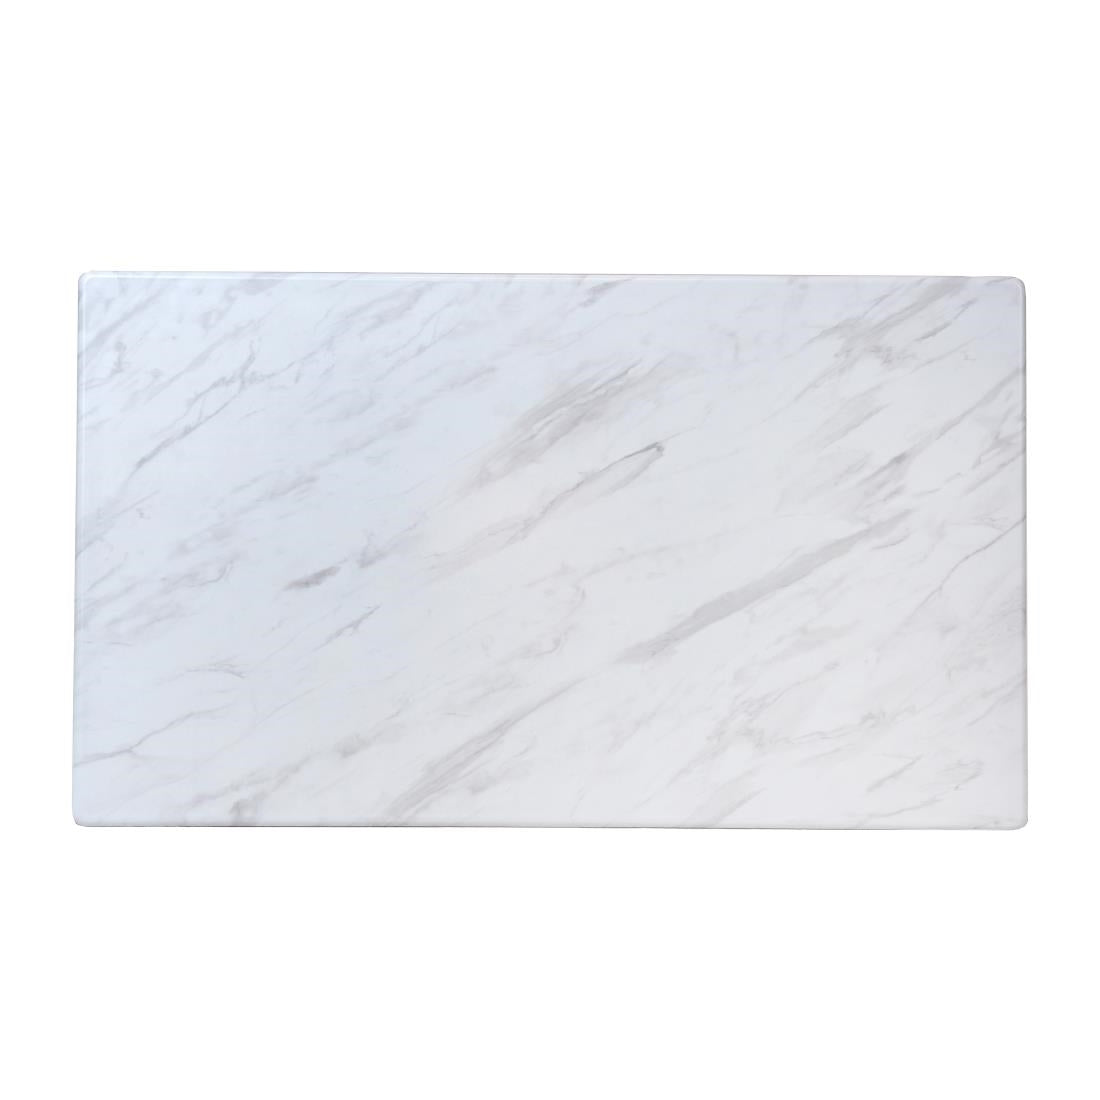 CZ854 Rectangular Laminate Table Top Marble 1200x700mm JD Catering Equipment Solutions Ltd